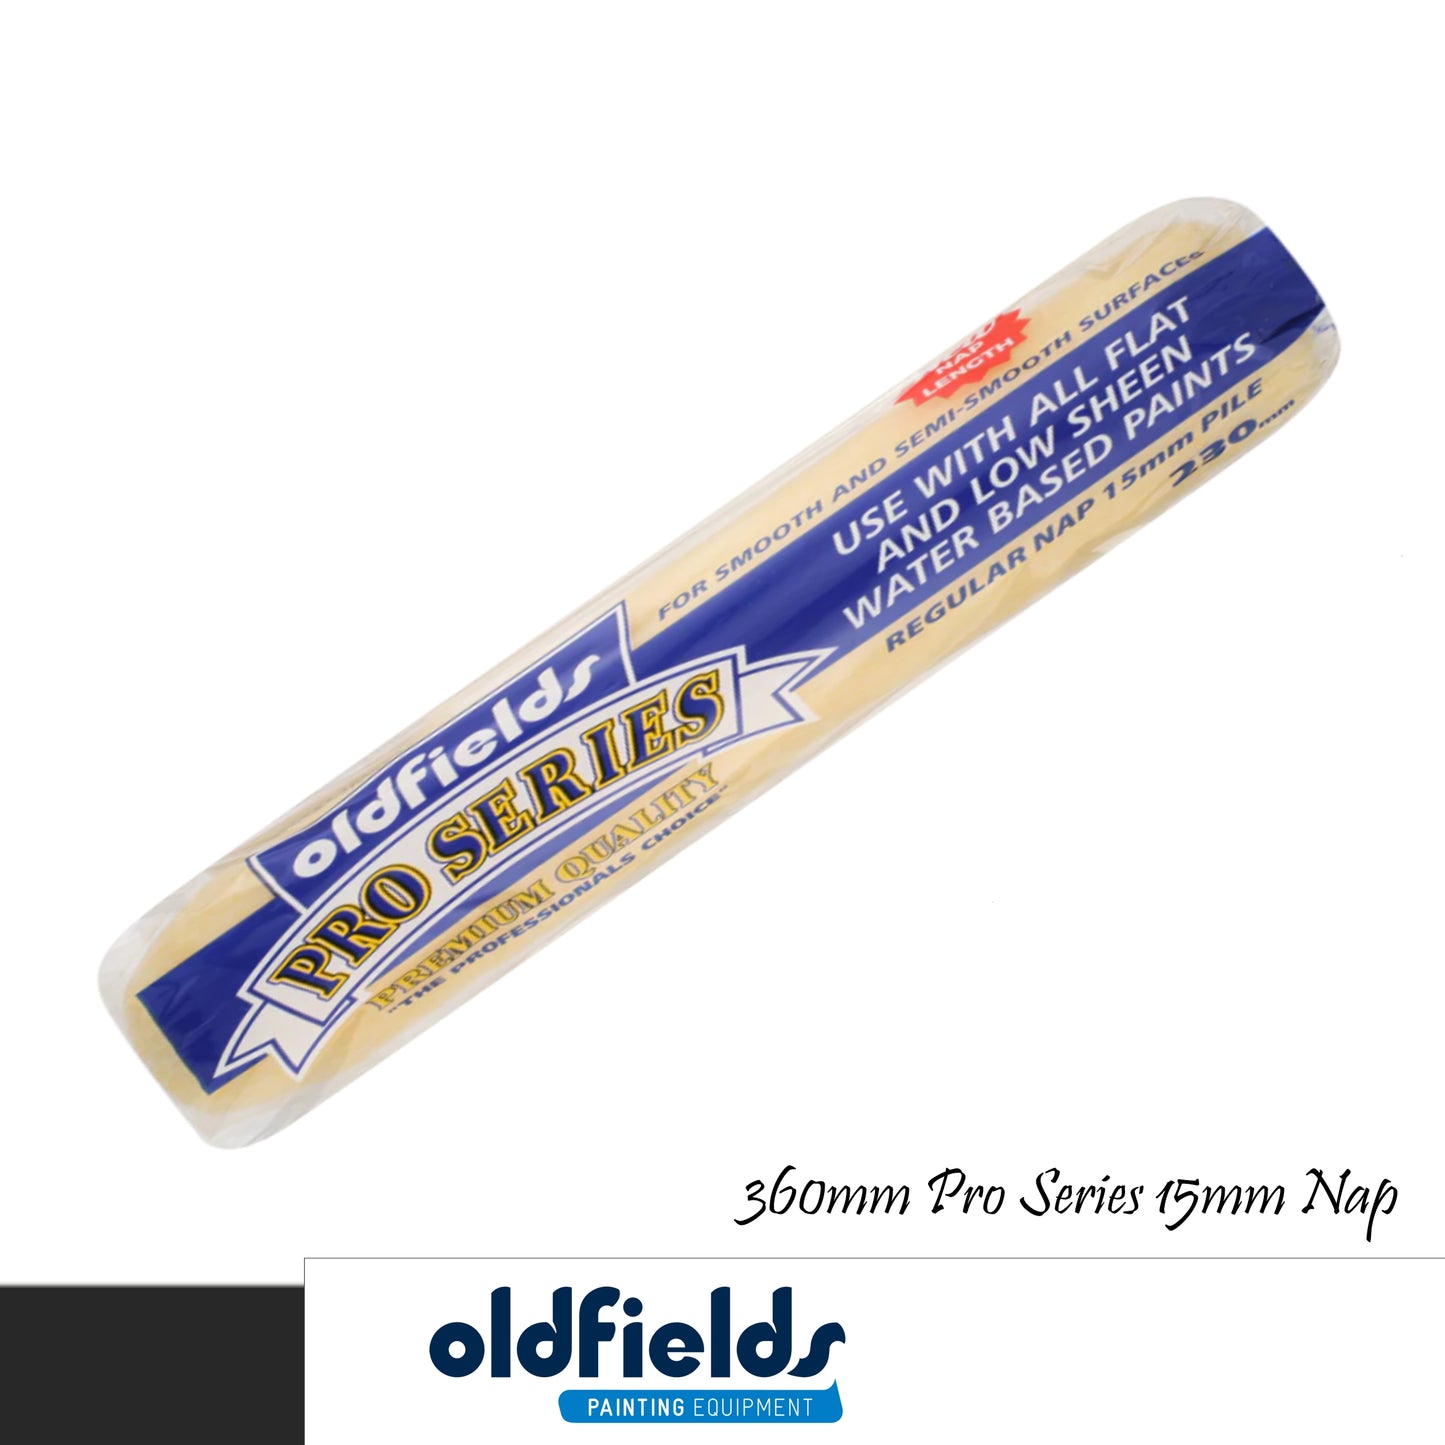 Pro Series Professional 15mm Nap Paint Roller Sleeves from Oldfields